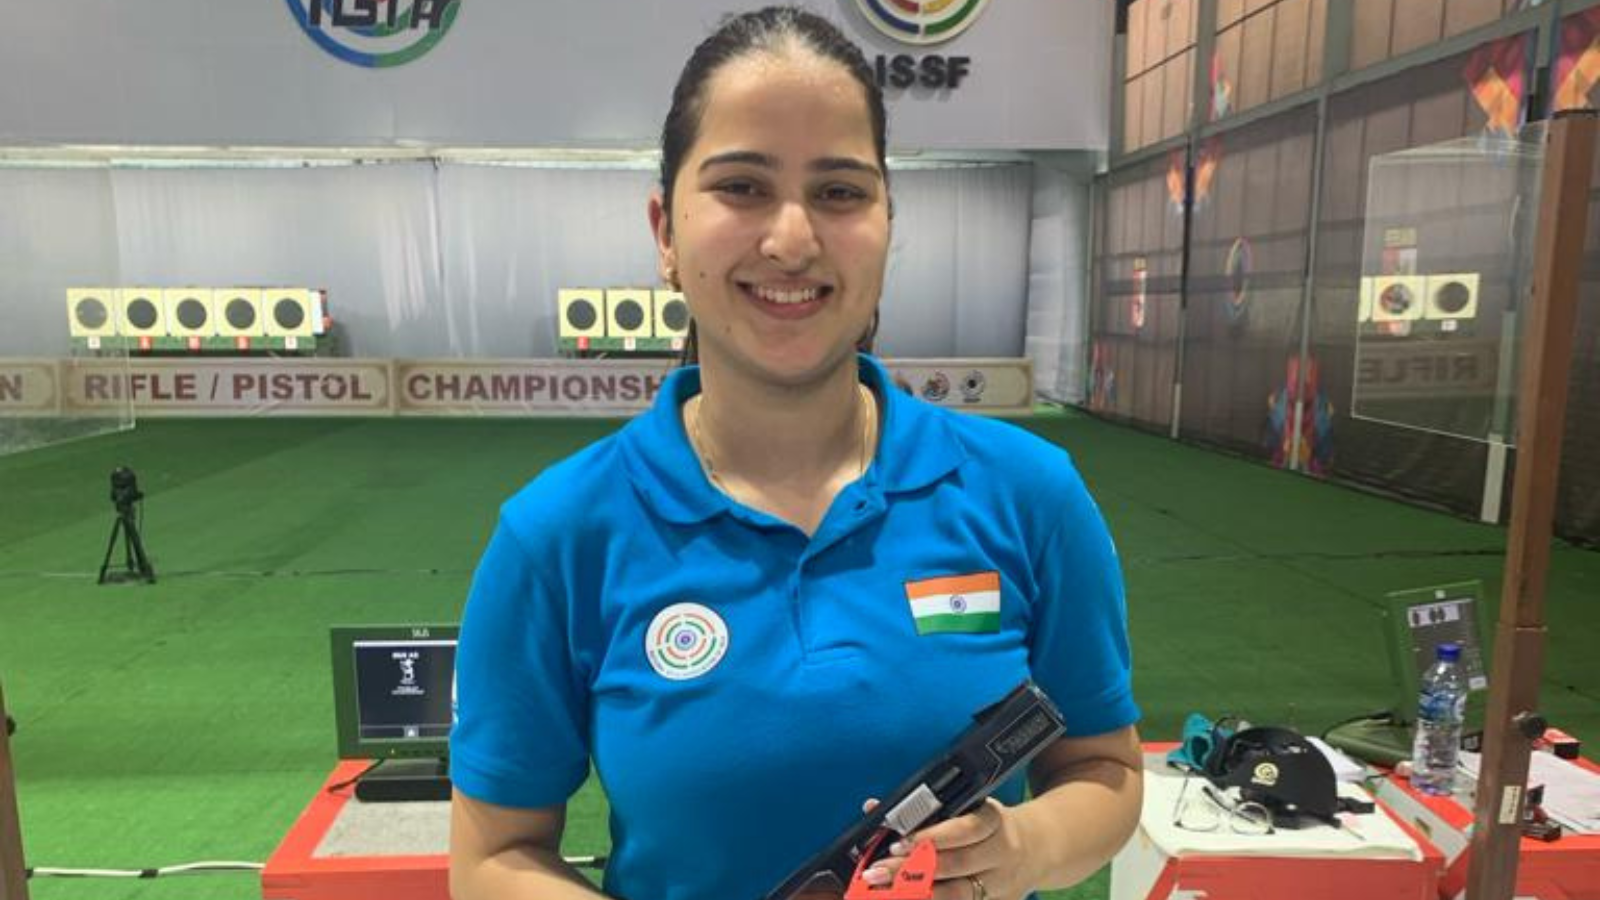 India set to field its biggest shooting contingent at Paris Olympics as